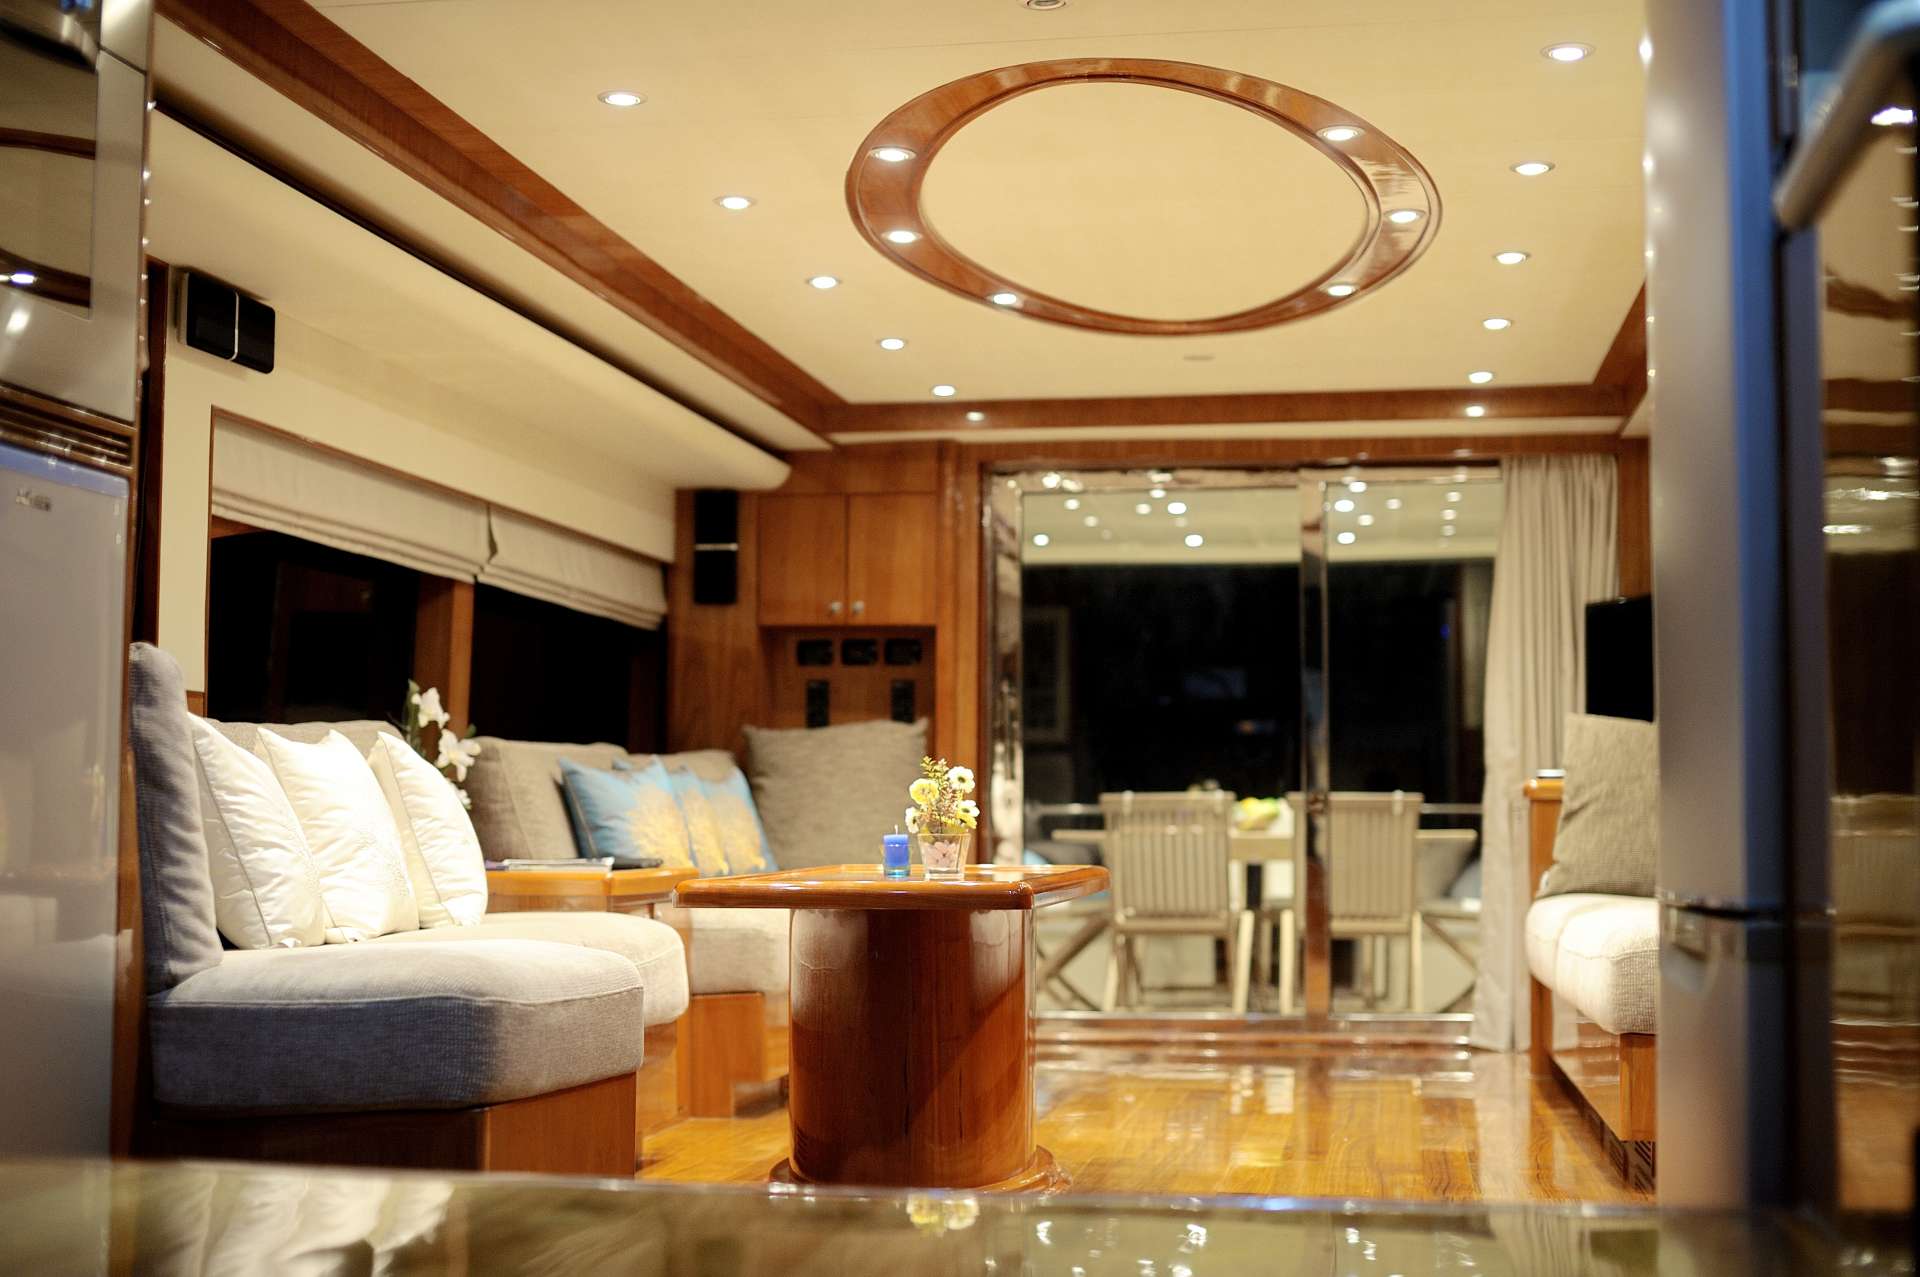 lady kathryn - Yacht Charter Philippines & Boat hire in SE Asia 2